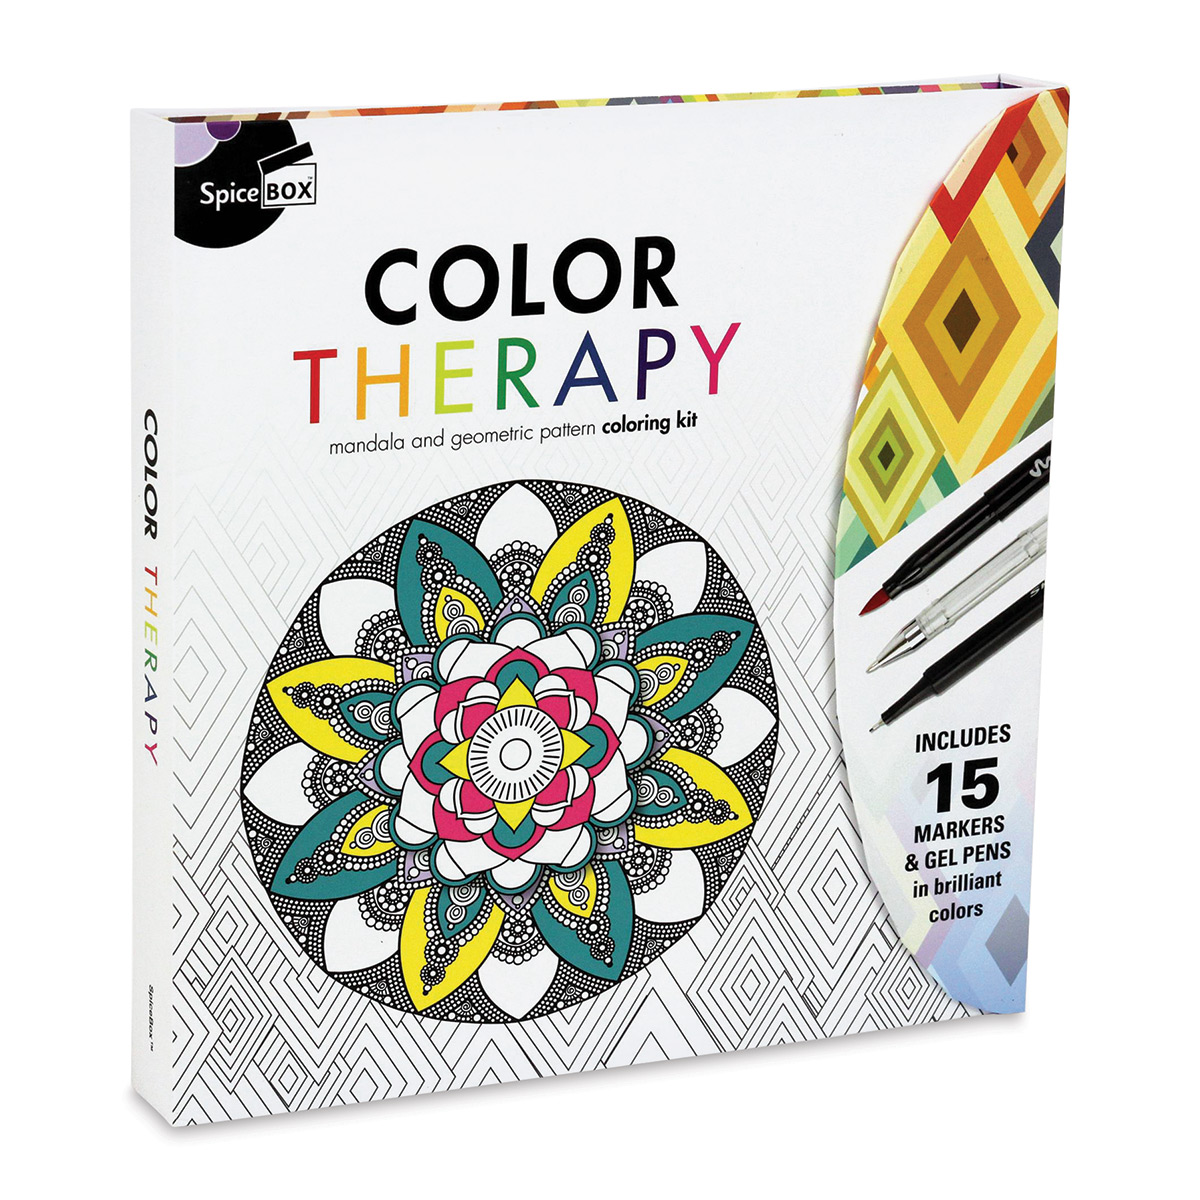 Art Therapy Sketchbook: Sketchbook with therapeutic adult coloring mandala  design on cover. Perfect for sketching, drawing, writing, journaling